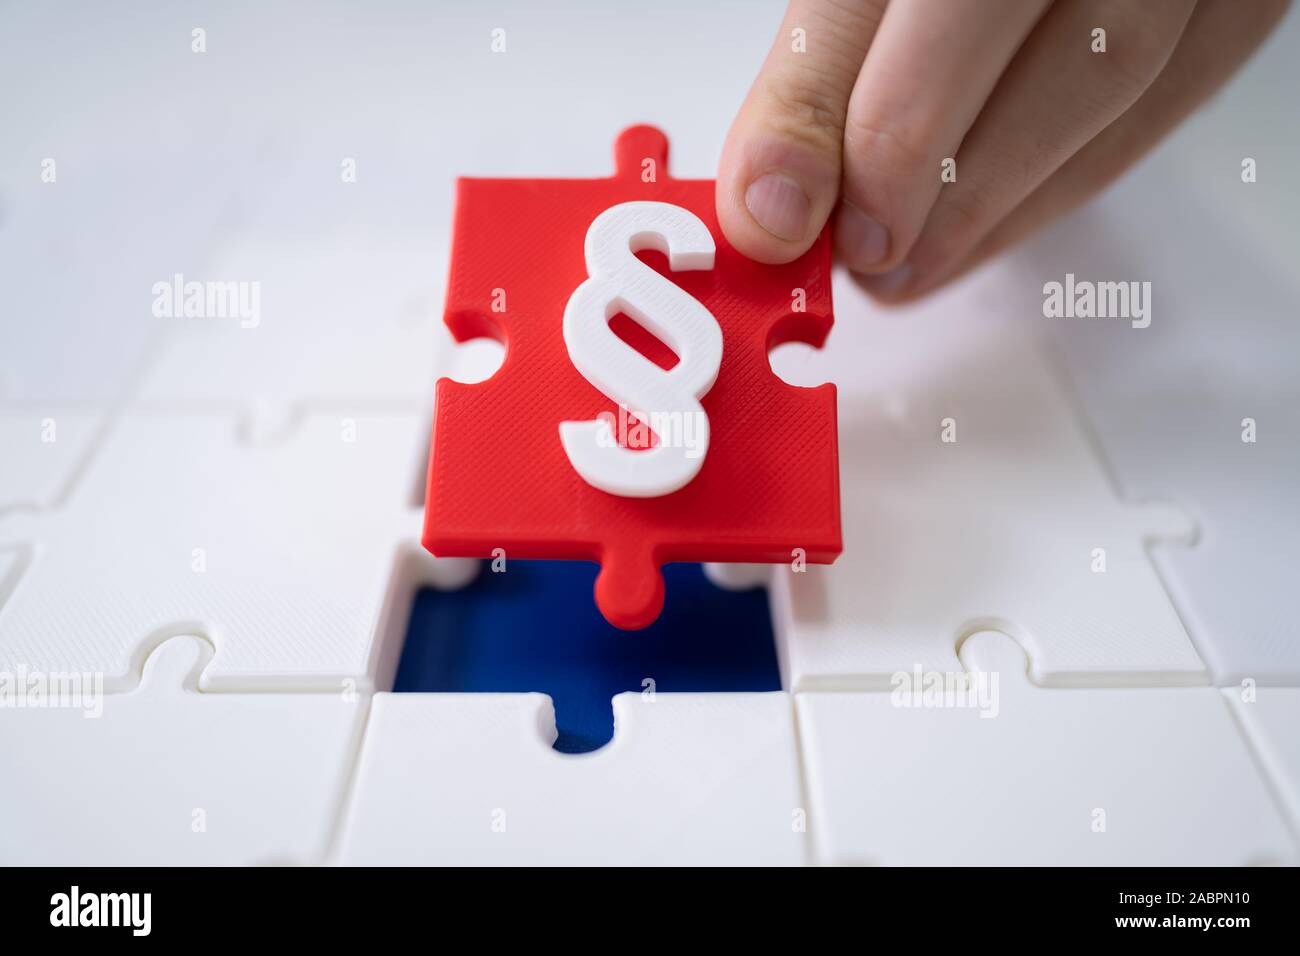 A Person Connecting Last Red Piece With Paragraph Symbol Into Jigsaw Puzzles Stock Photo